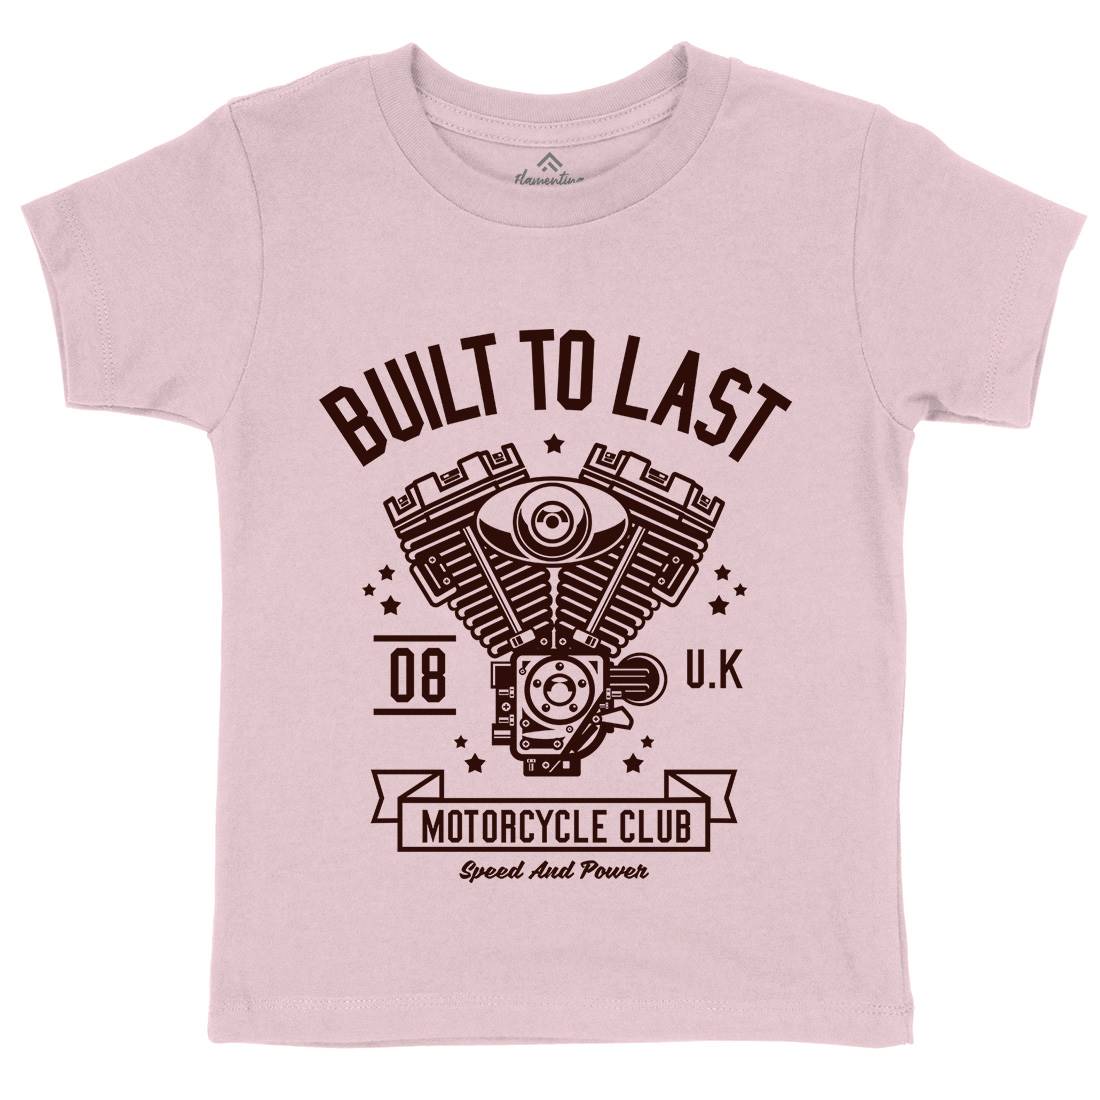 Built To Last Kids Crew Neck T-Shirt Motorcycles A215